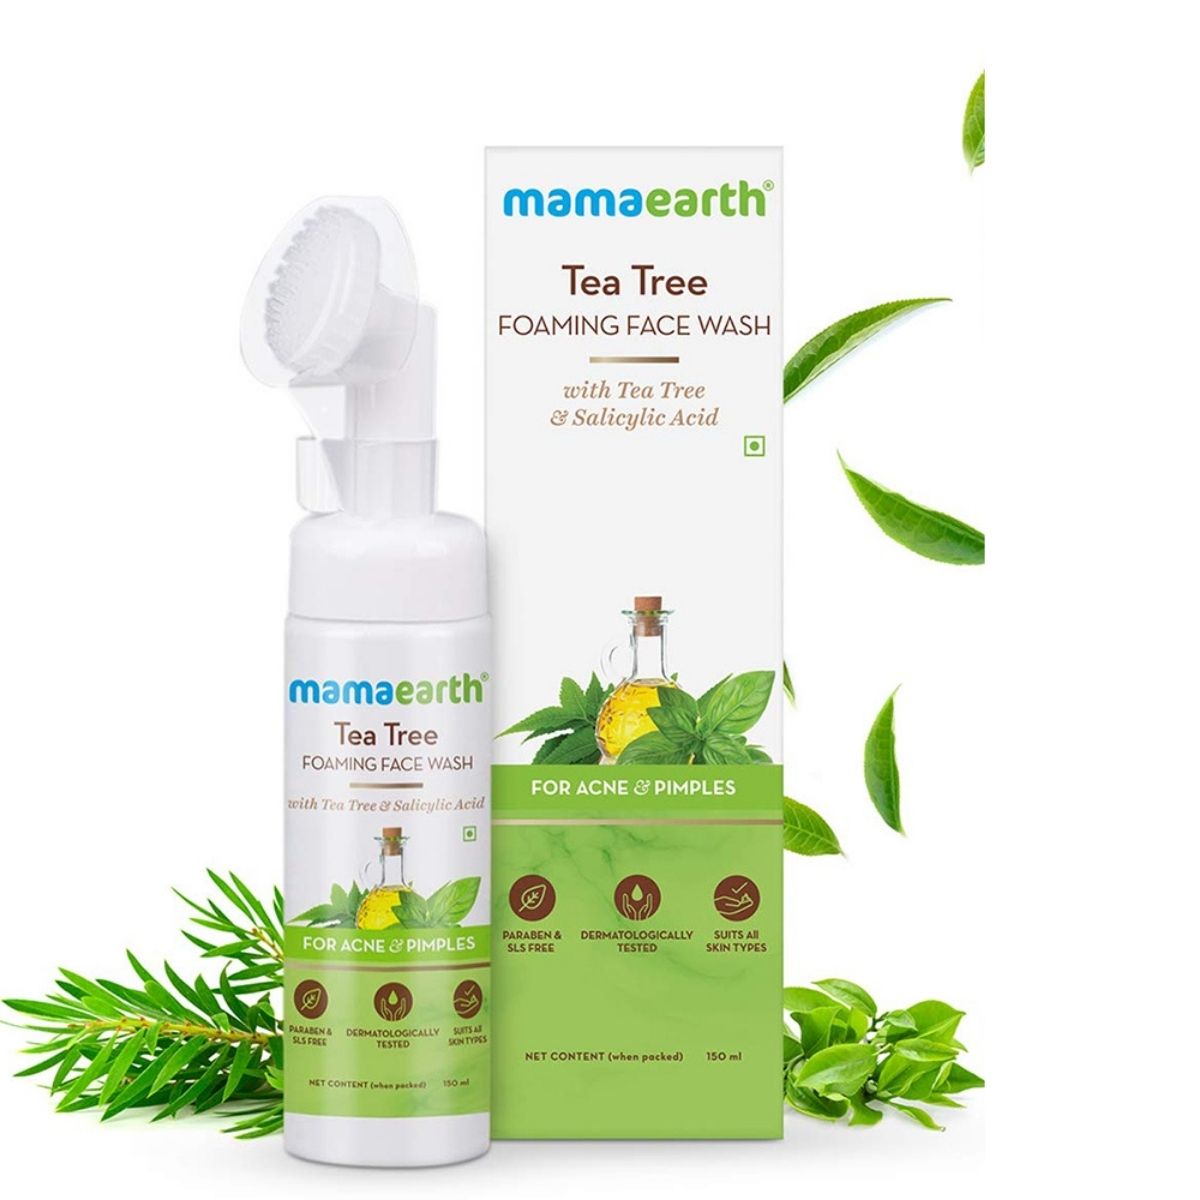 Mamaearth Tea Tree Foaming Face Wash With Tea Tree And Salicylic Acid For Acne And Pimples, 150ml